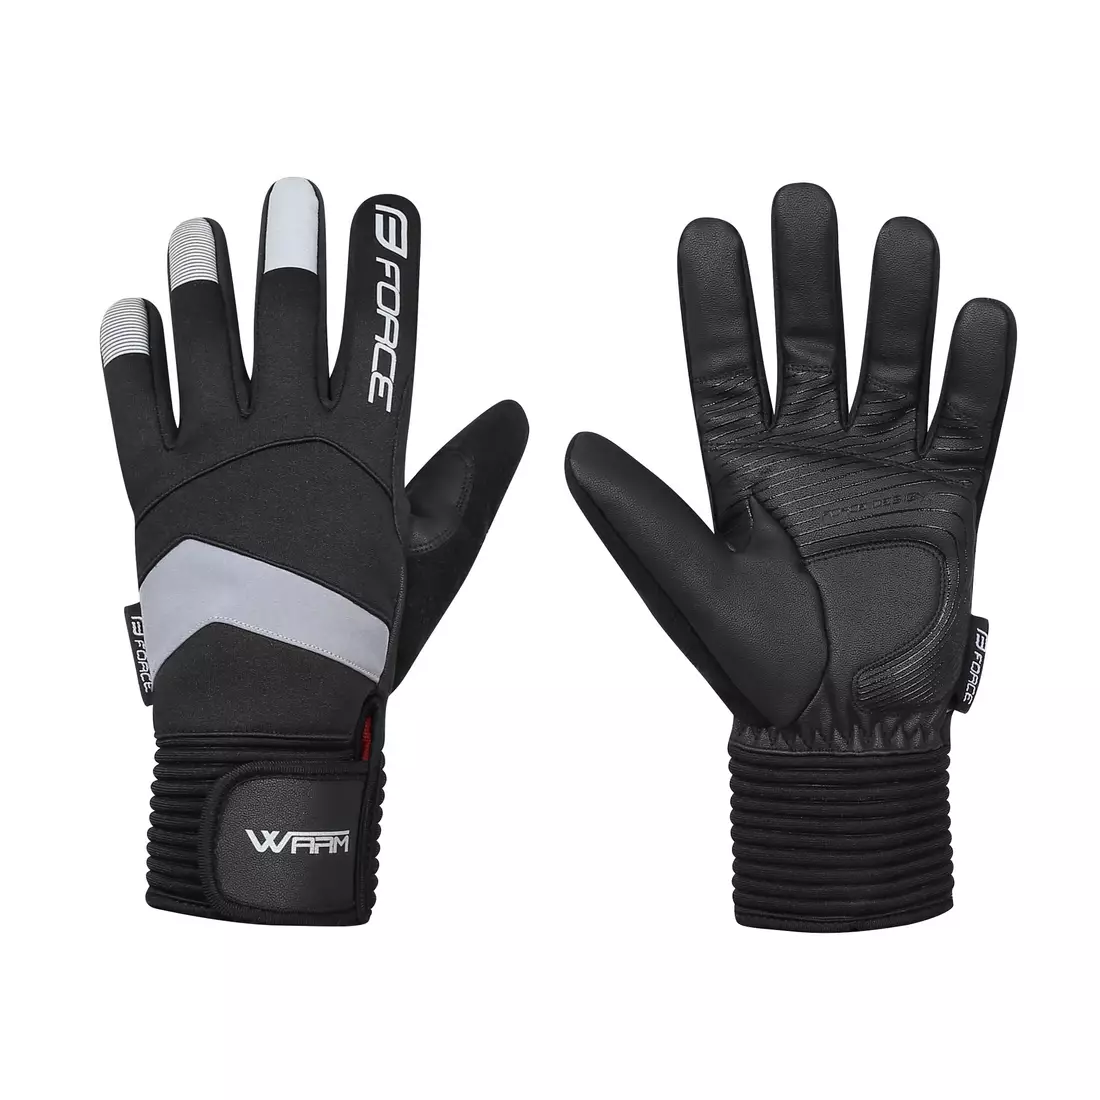 FORCE WARM Winter Bicycle Gloves Black 90458